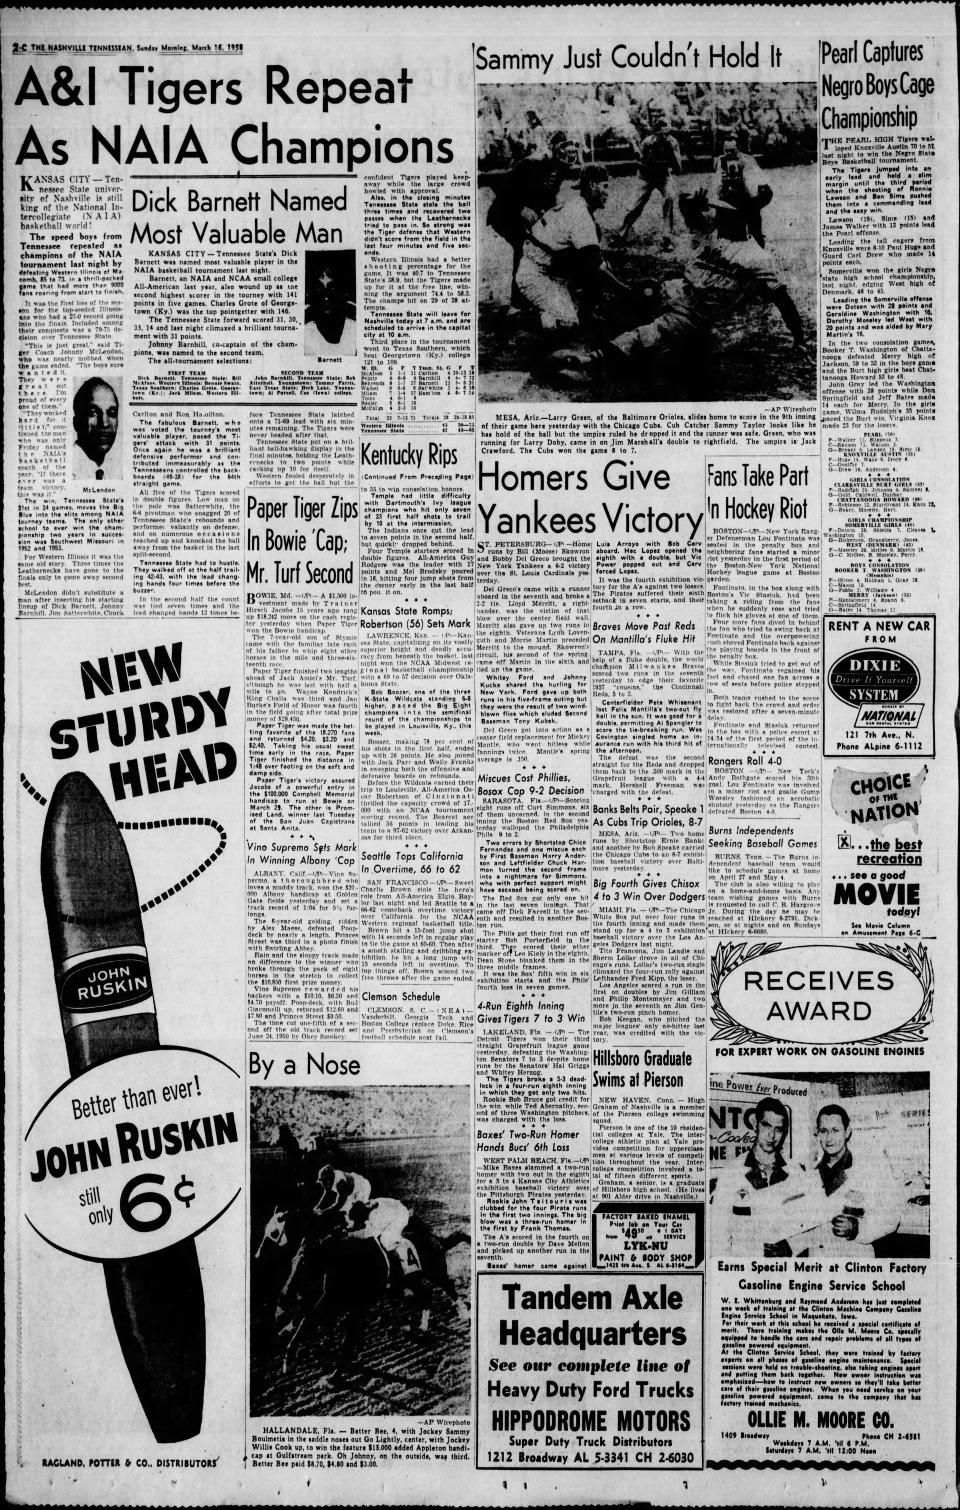 Championship coverage of Dick Barnett and Tennessee State men's basketball in the March 16, 1958, edition of The Tennessean.